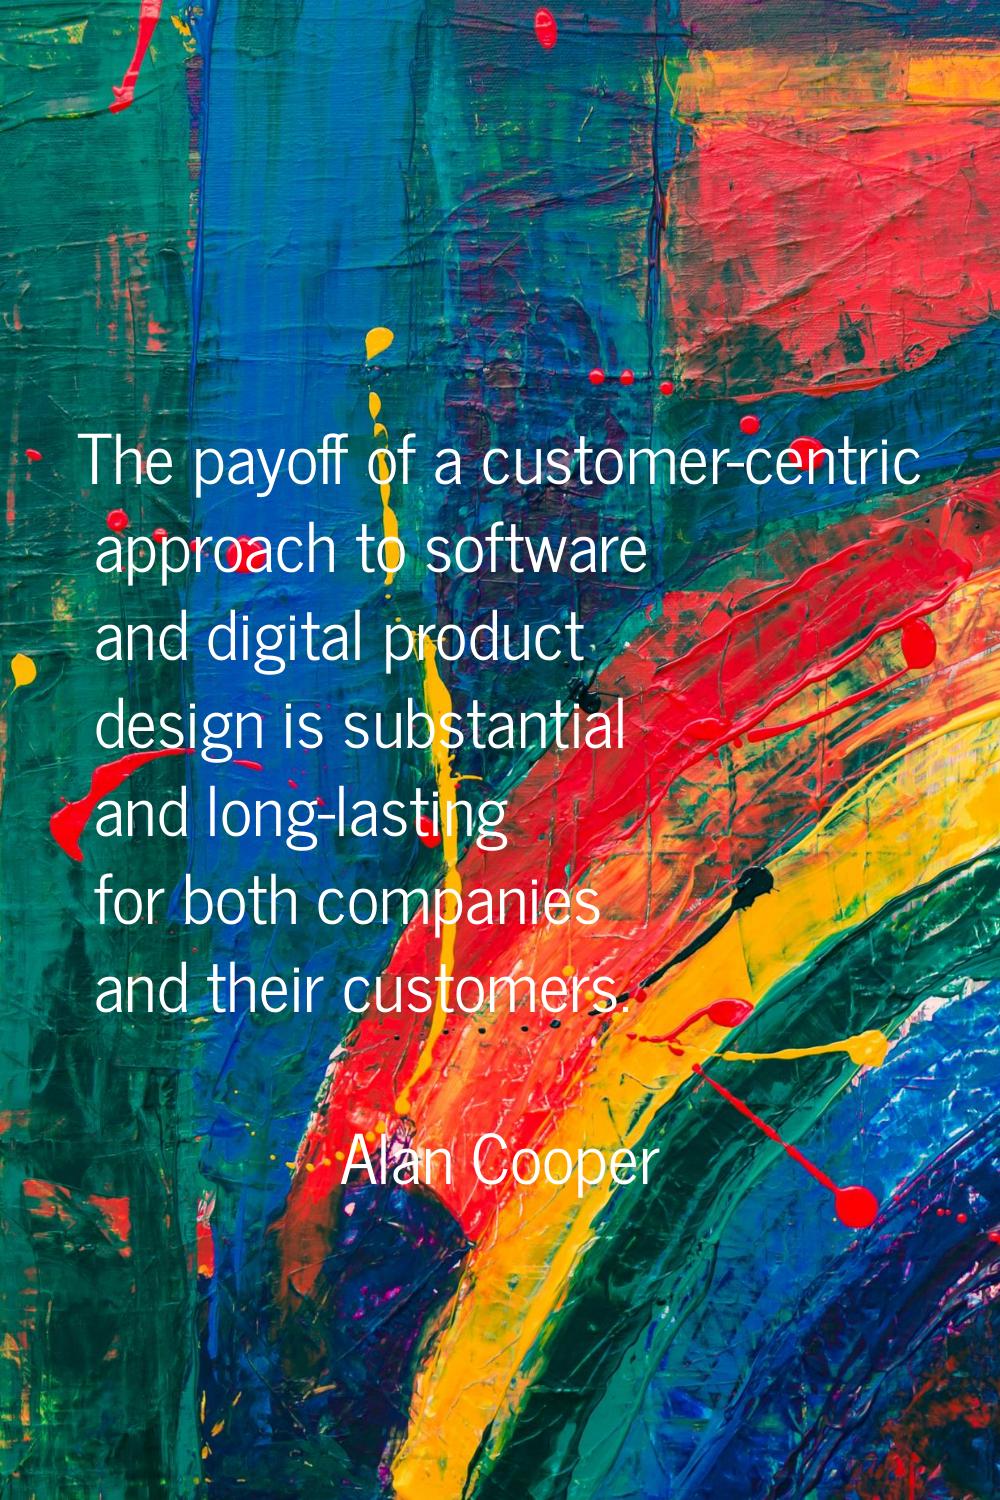 The payoff of a customer-centric approach to software and digital product design is substantial and